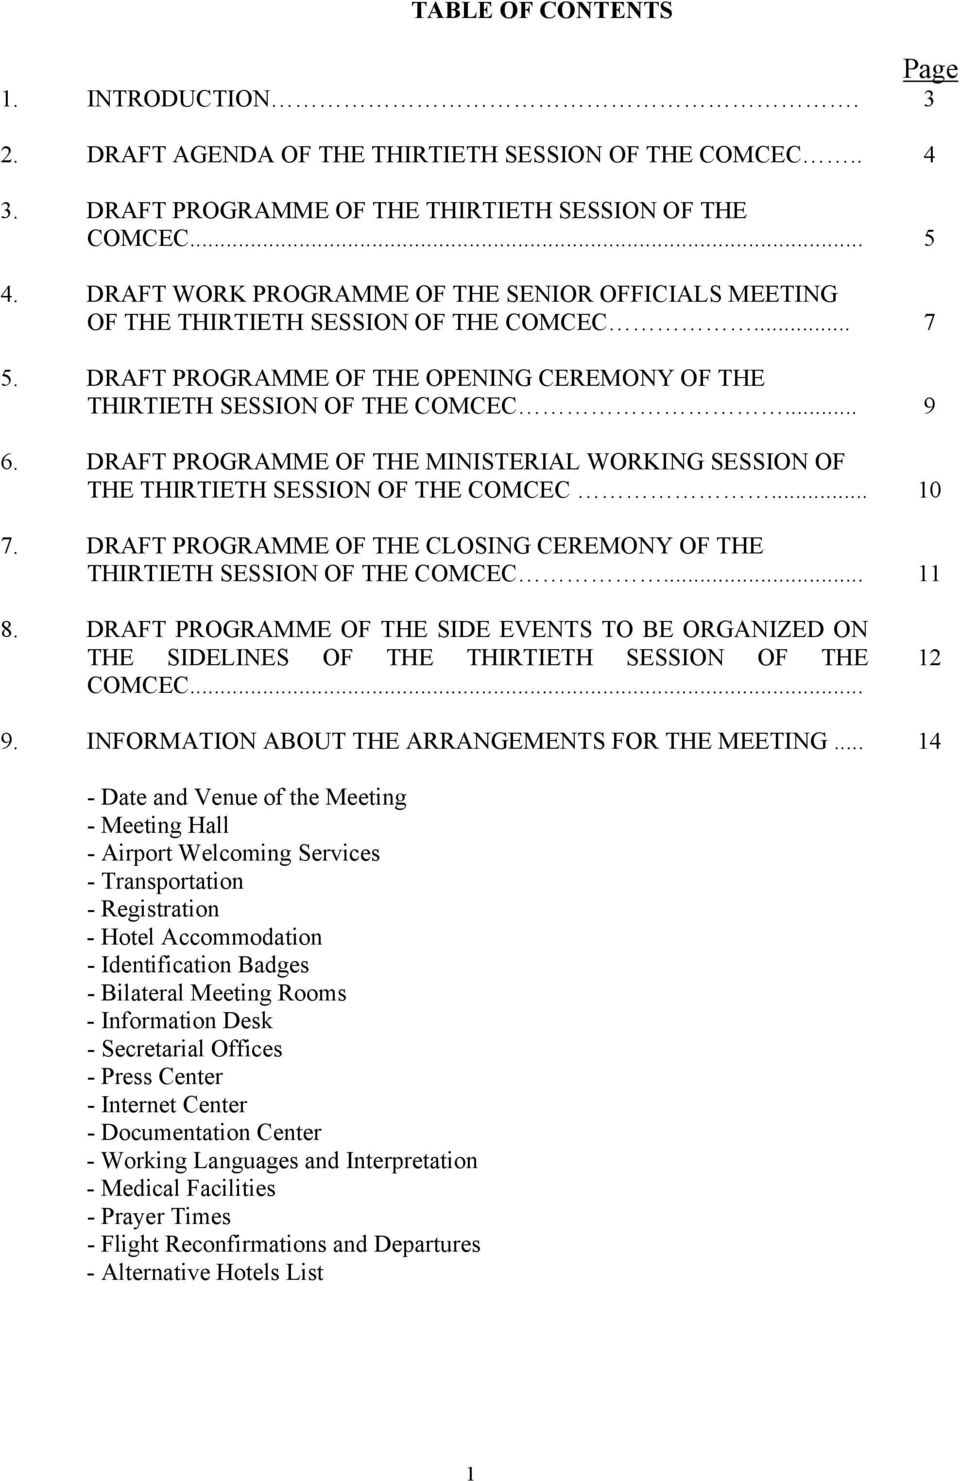 DRAFT PROGRAMME OF THE MINISTERIAL WORKING SESSION OF THE THIRTIETH SESSION OF THE COMCEC... 10 7. DRAFT PROGRAMME OF THE CLOSING CEREMONY OF THE THIRTIETH SESSION OF THE COMCEC... 11 8.